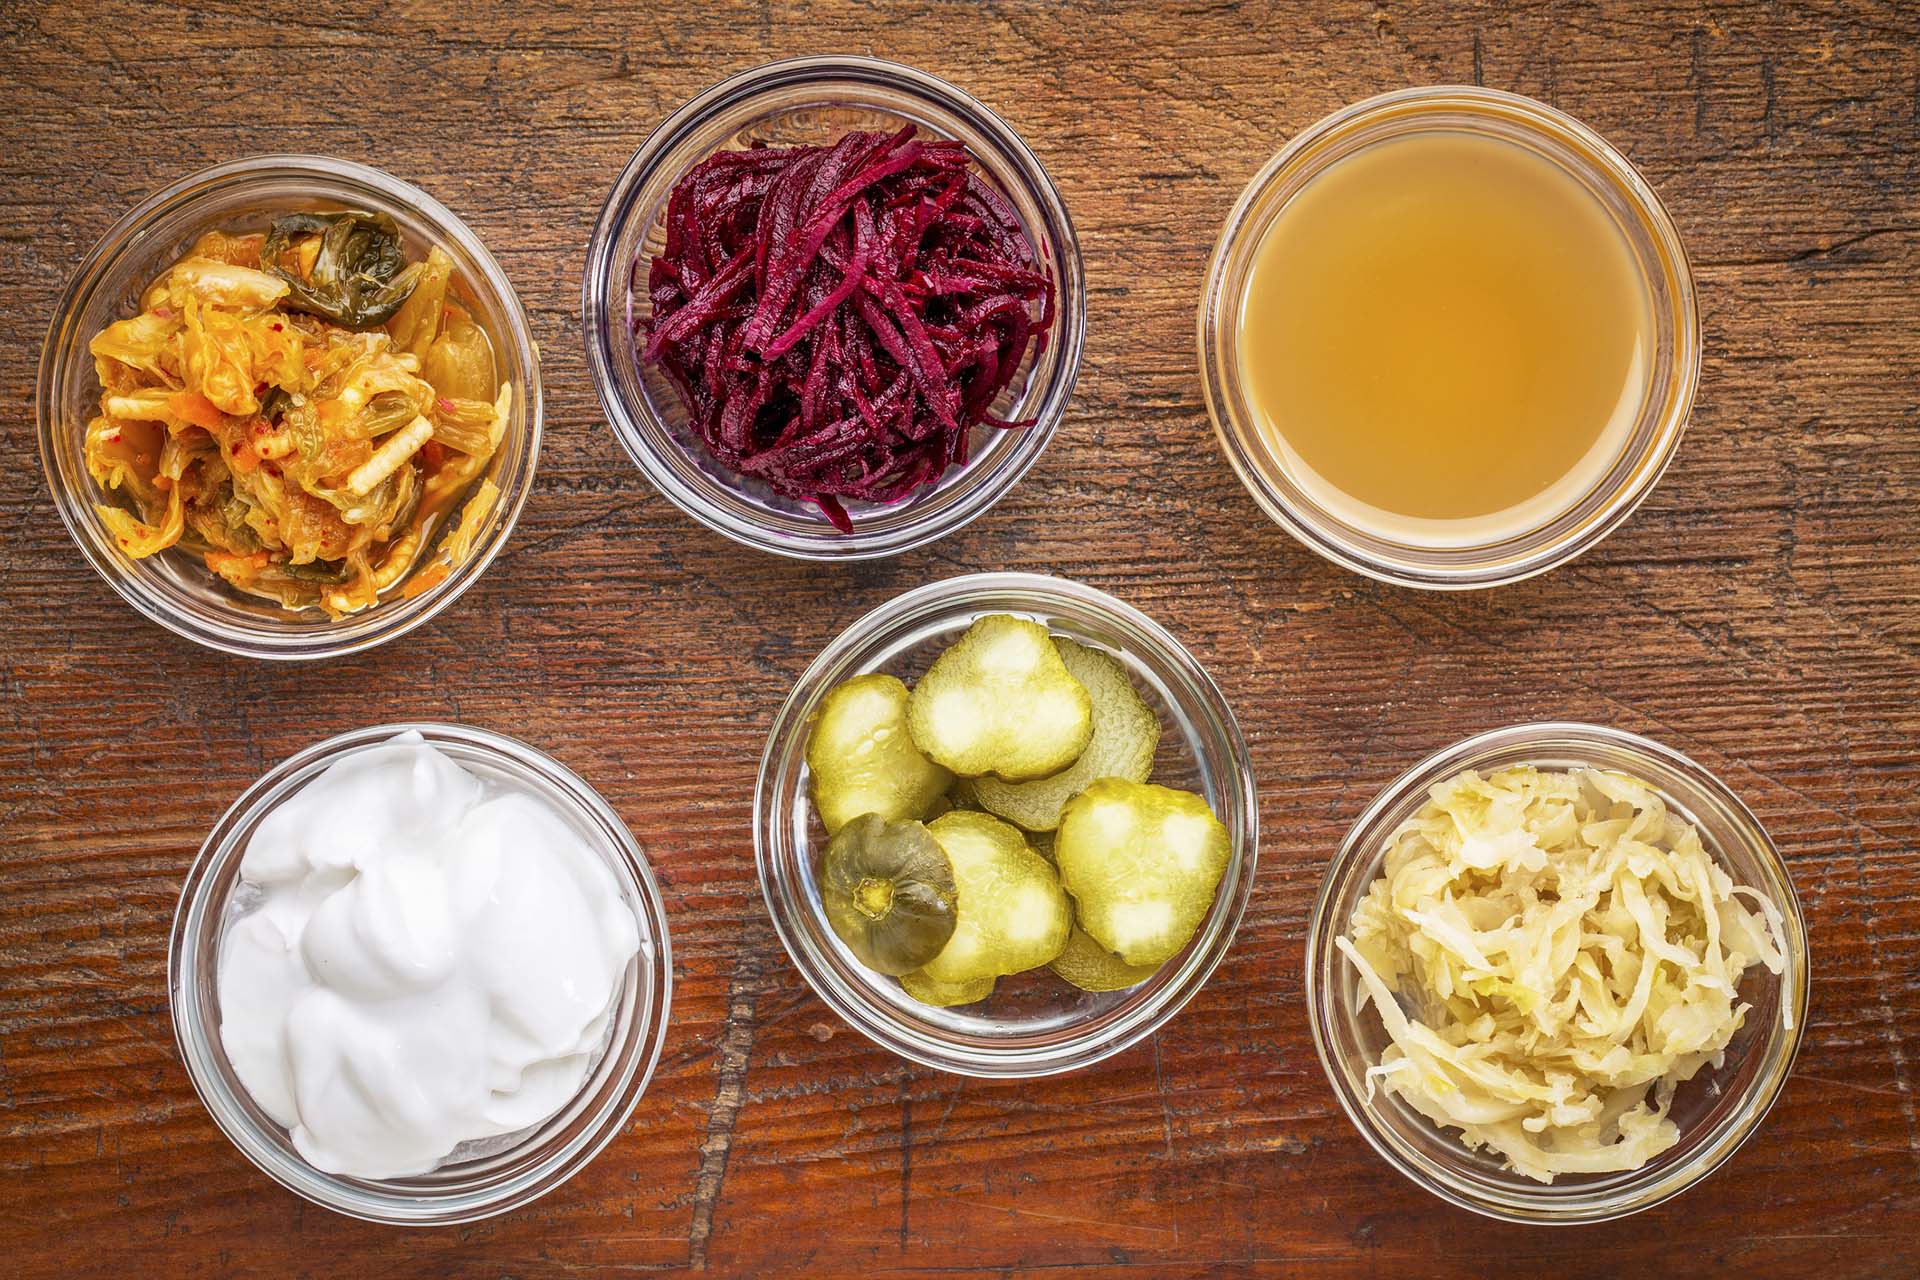 a set of fermented food great for gut health - top view of glass bowls against wood:  kimchi, red beets, apple cider vinegar, coconut milk yogurt, cucumber pickles, sauerkraut